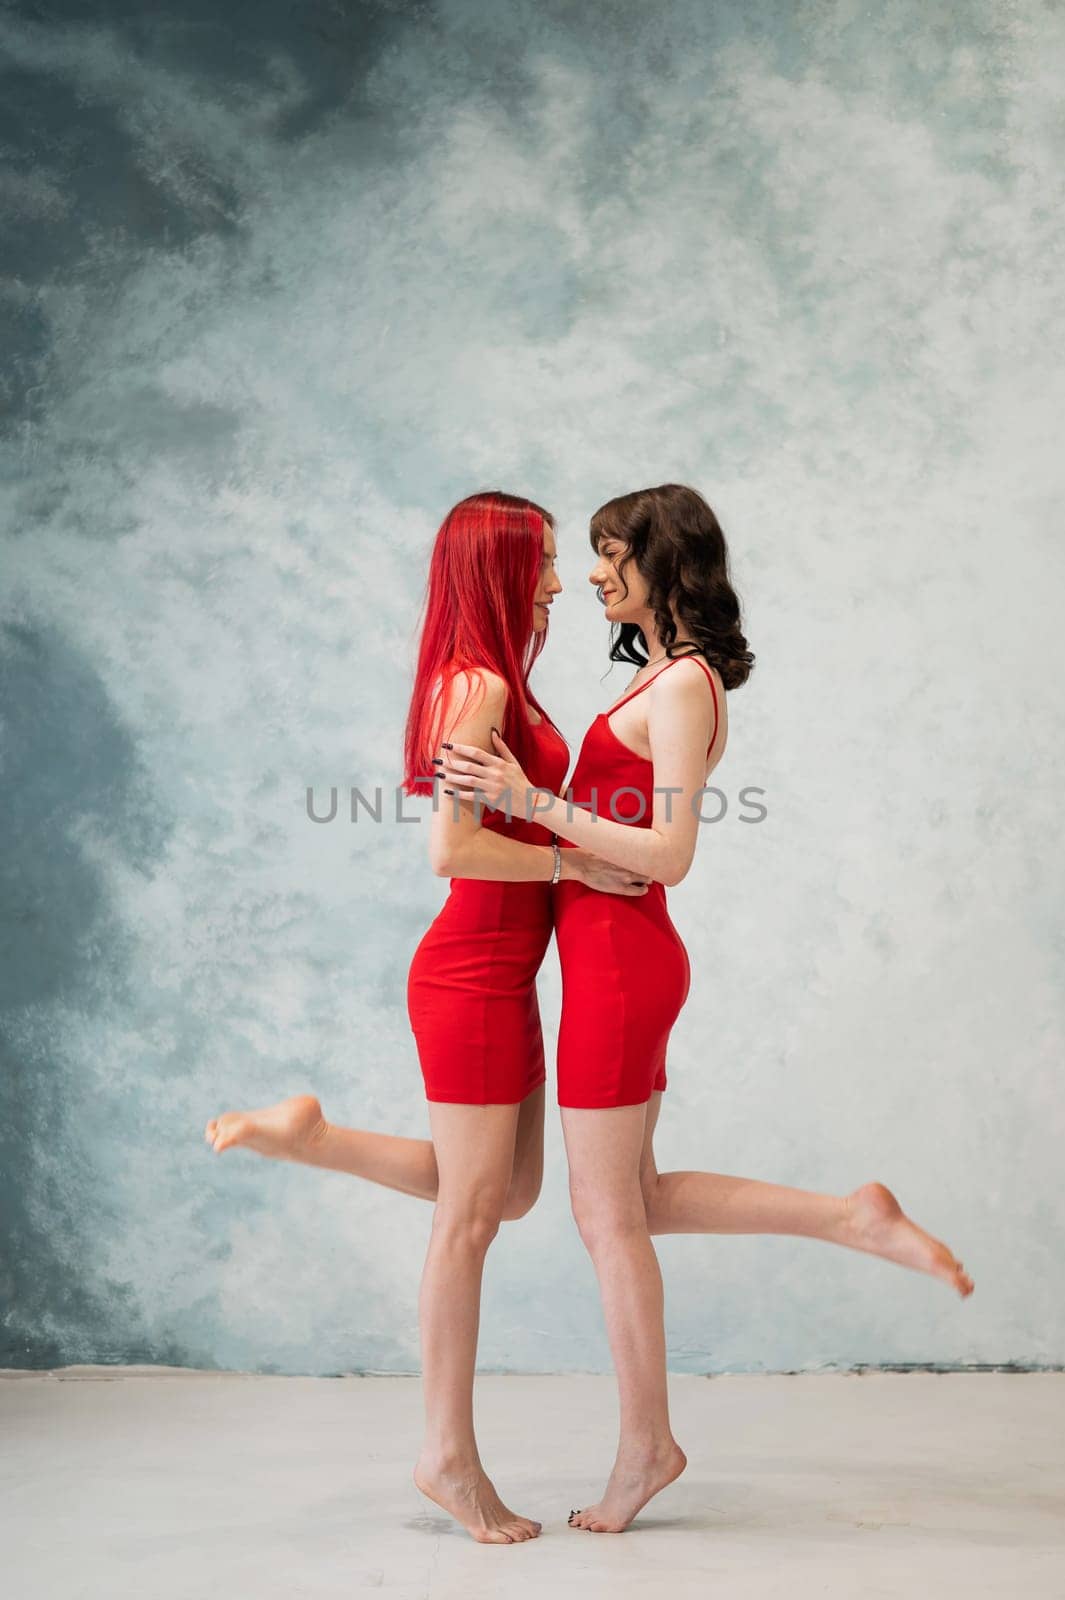 Full-length portrait of two tenderly embracing women dressed in identical red dresses. Lesbian intimacy. by mrwed54